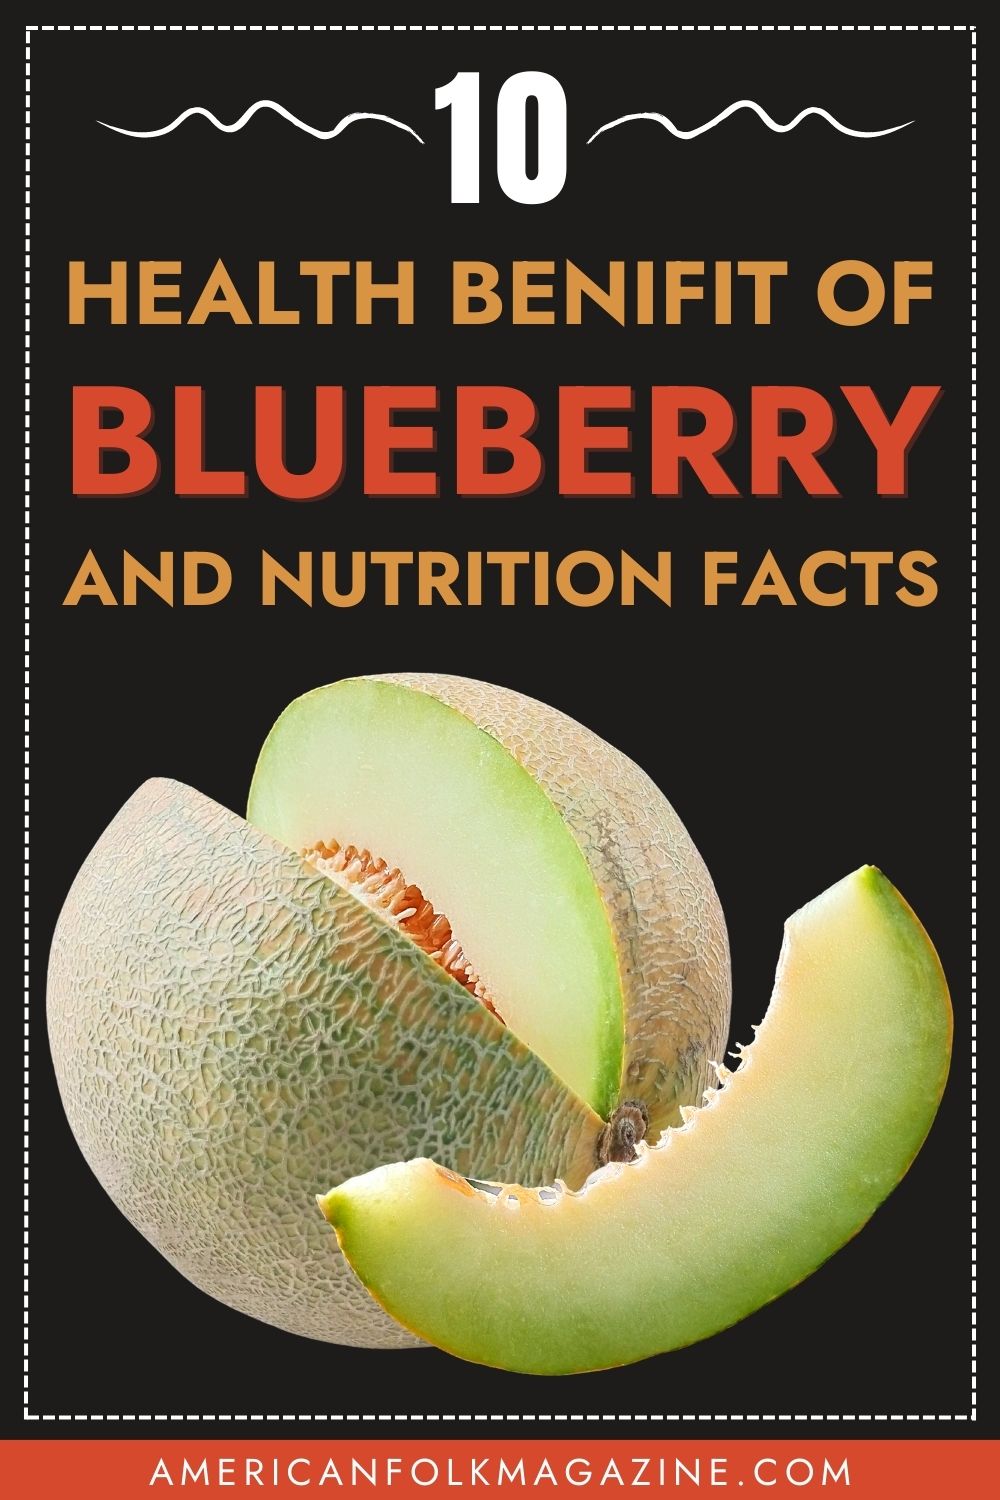 Honeydew Melon Nutrition Facts And 10 Health Benefits 5986